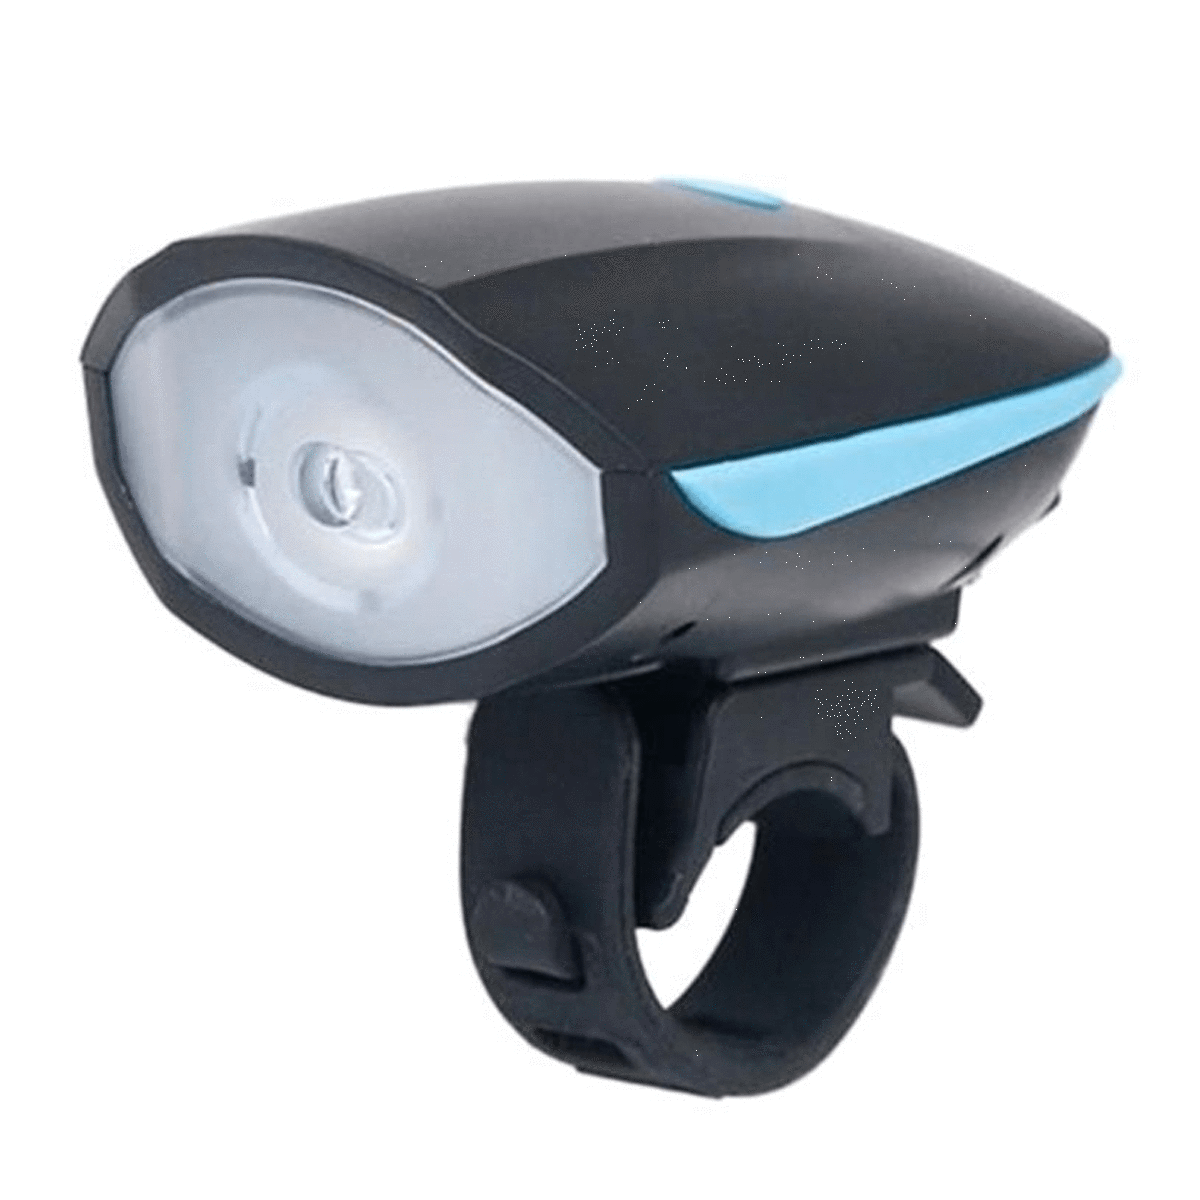 LED Lamp With Electric Horn For Bicycle - VLRA